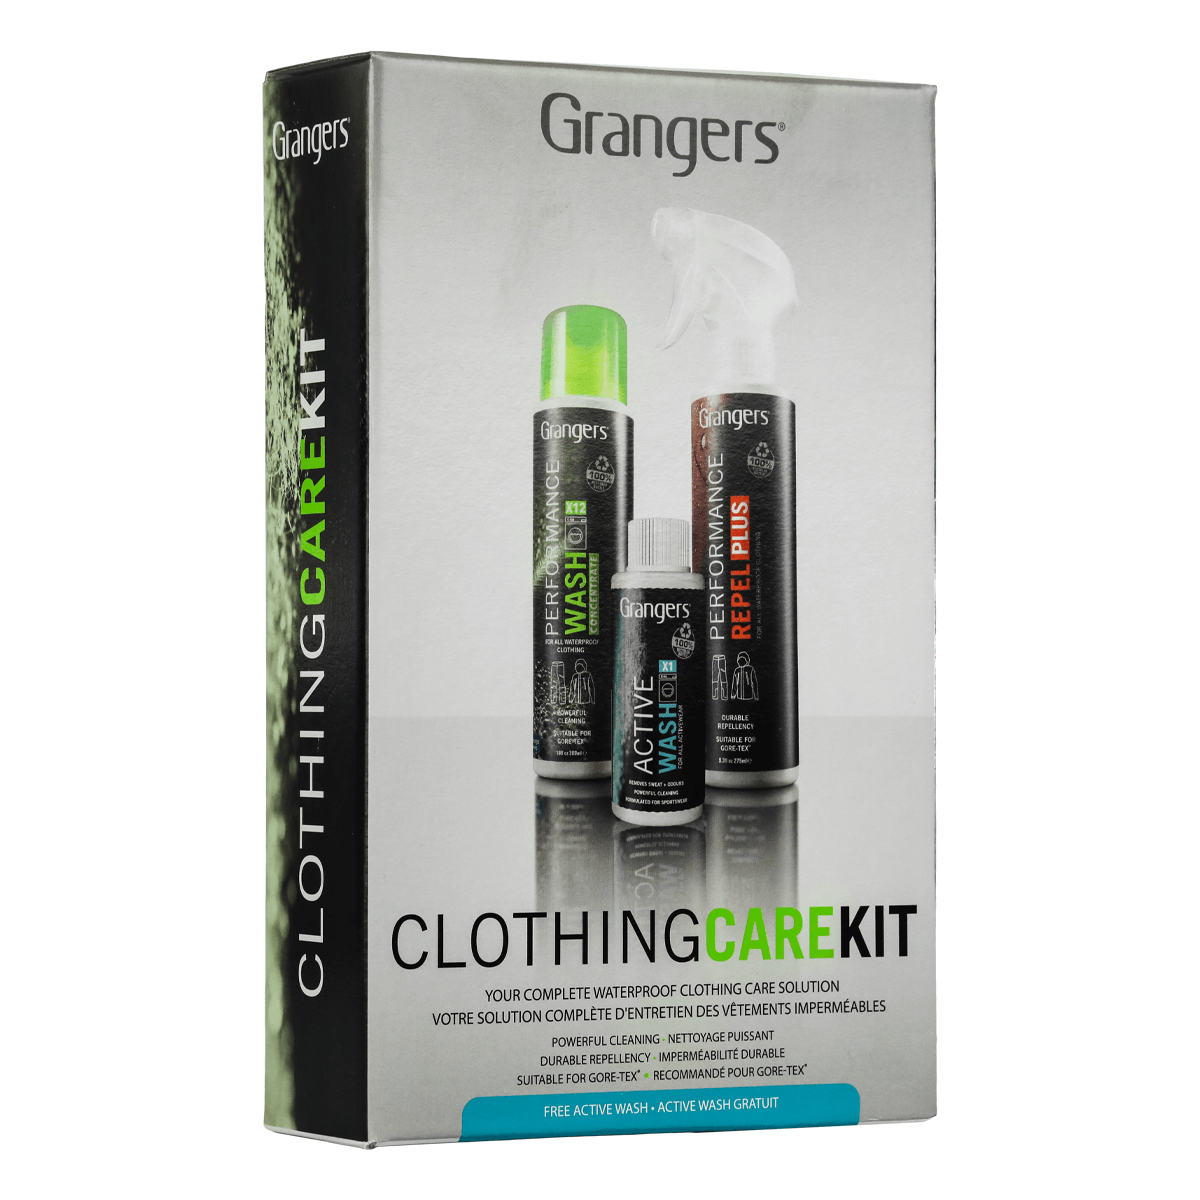 Grangers Performance Wash review - new formulation doubles